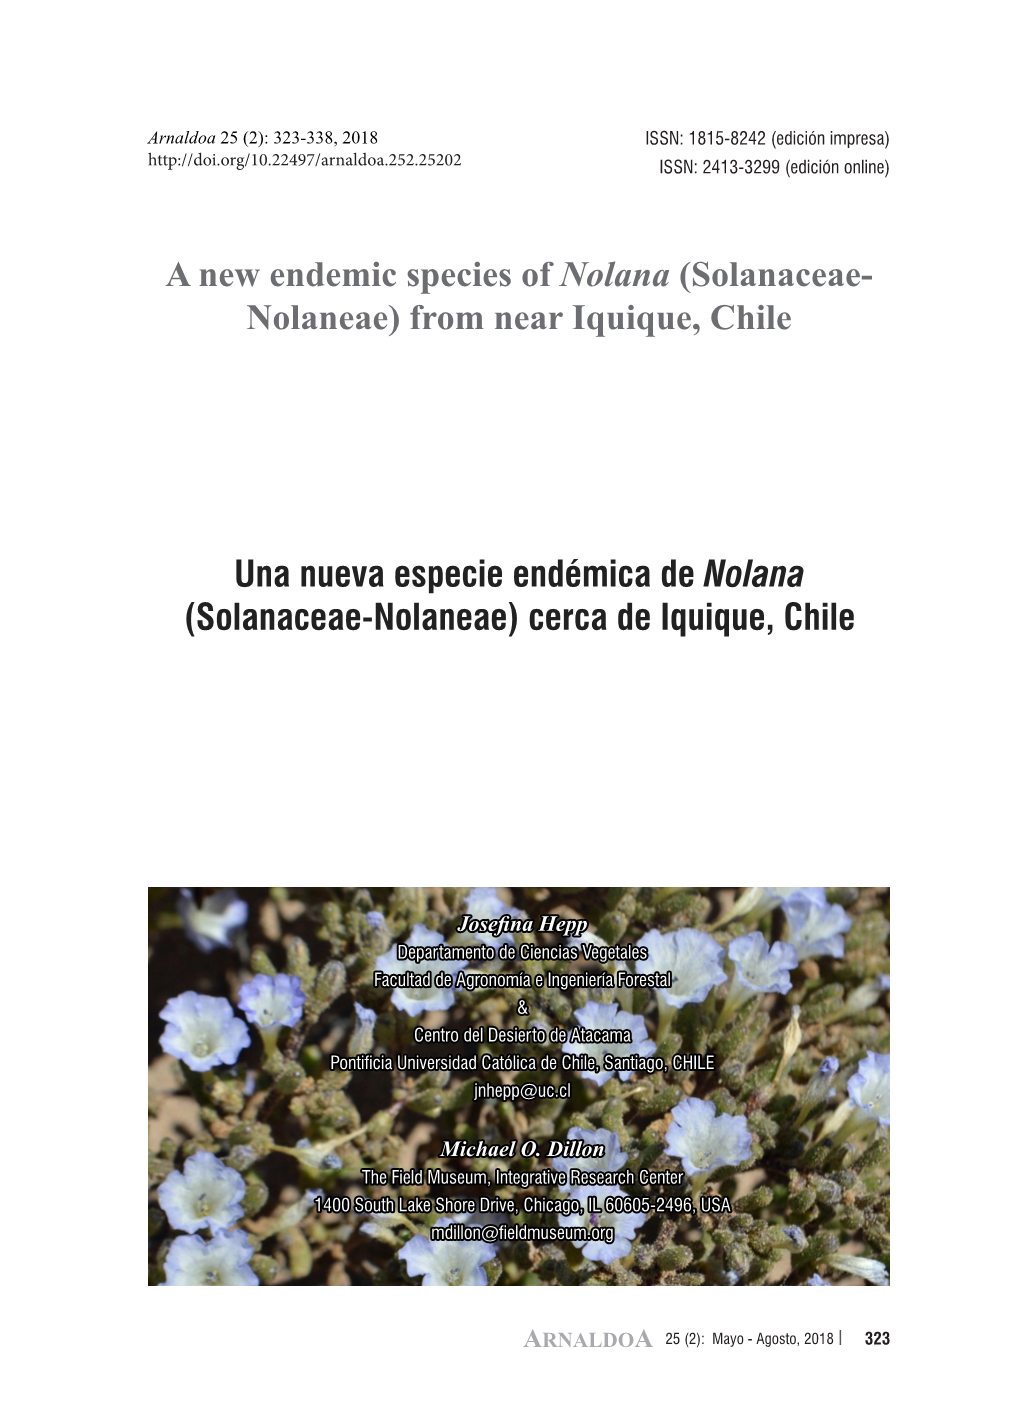 A New Endemic Species of Nolana (Solanaceae- Nolaneae) from Near Iquique, Chile